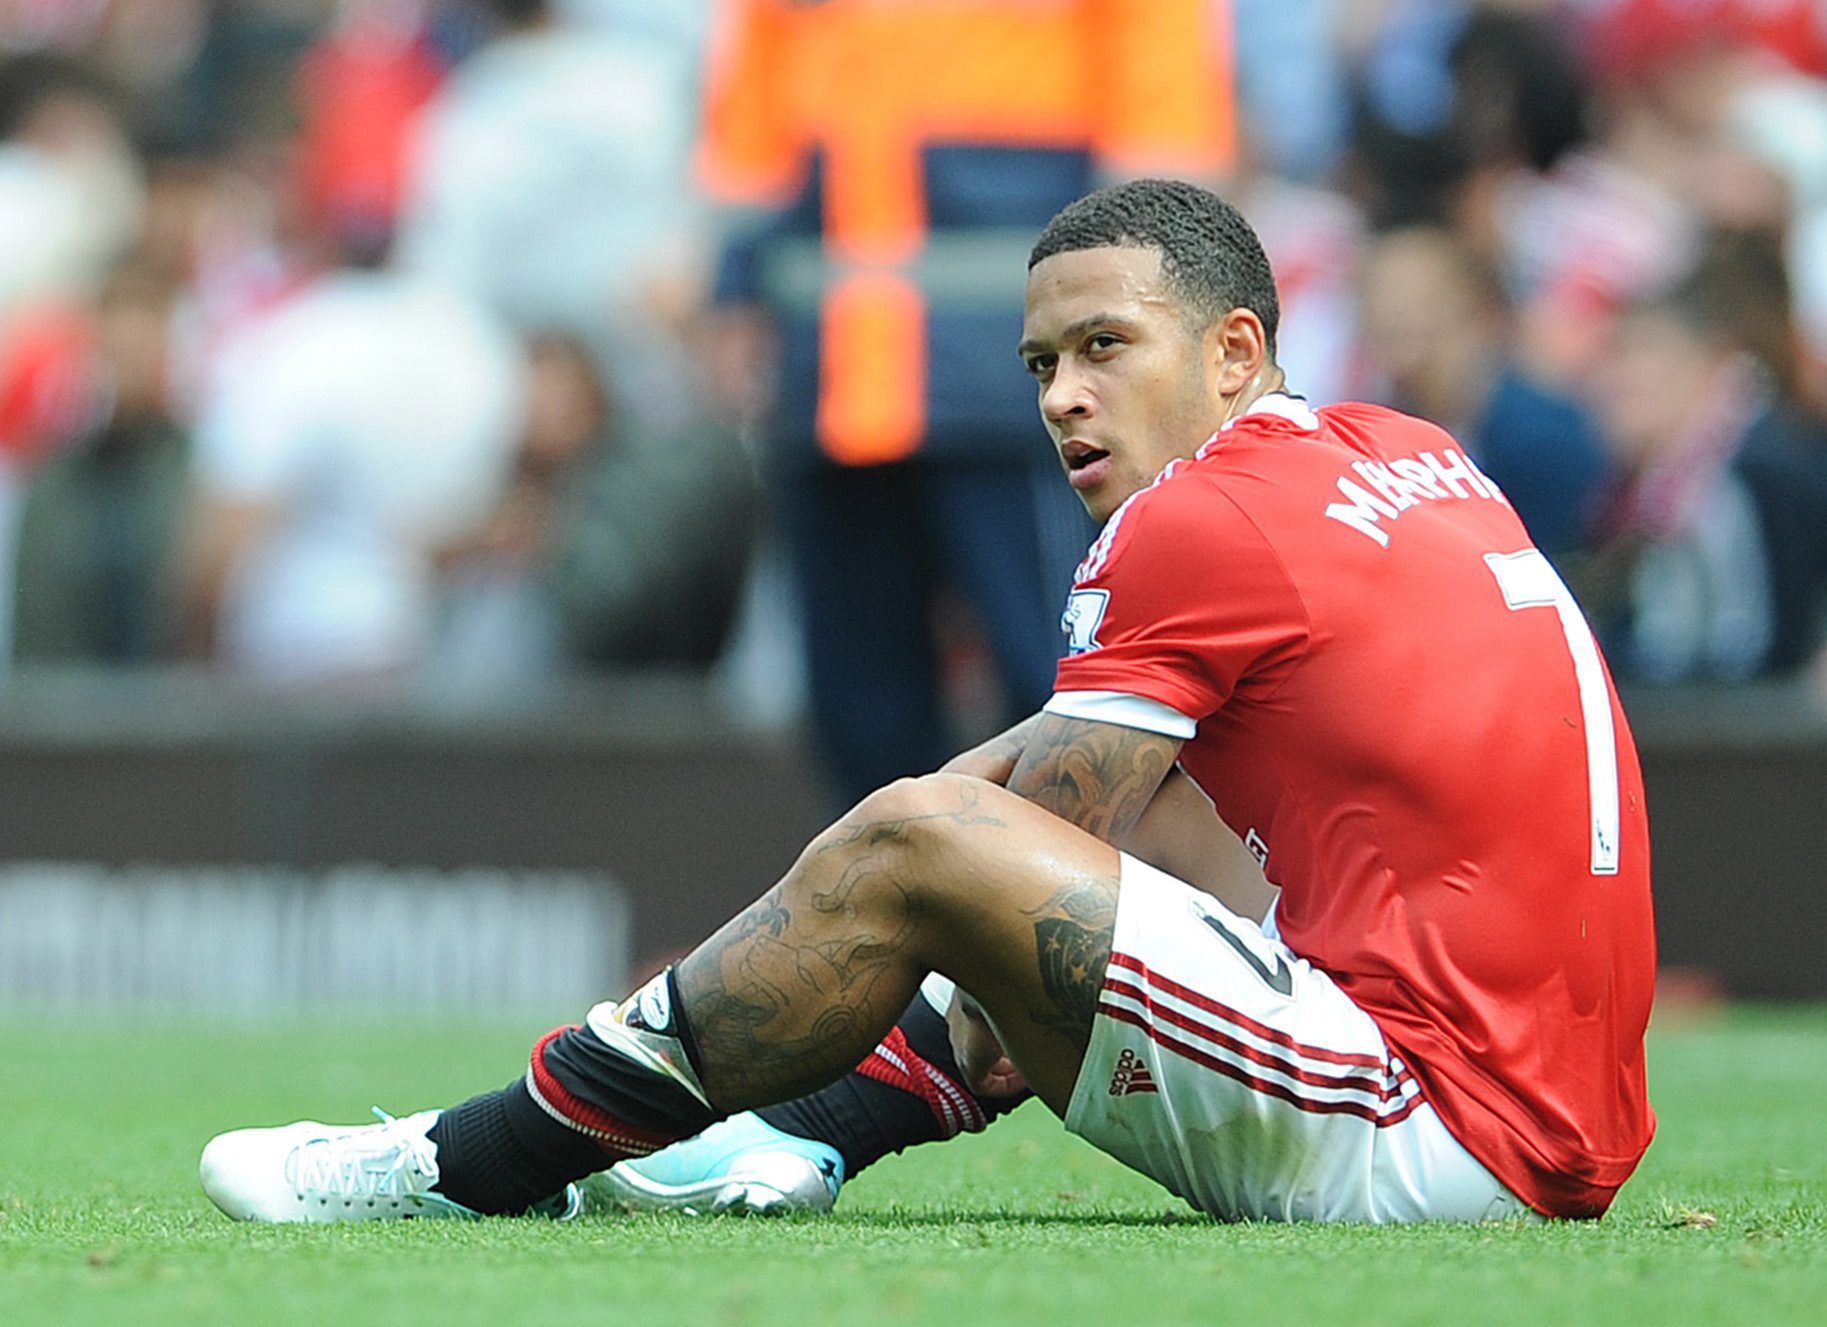 epa04892966 Manchester United's Memphis Depay reacts during the English Premier League soccer match between Manchester United and Newcastle United at Old Trafford, Manchester, Britain, 22 August 2015.  EPA/PETER POWELL EDITORIAL USE ONLY. No use with unauthorized audio, video, data, fixture lists, club/league logos or 'live' services. Online in-match use limited to 75 images, no video emulation. No use in betting, games or single club/league/player publications